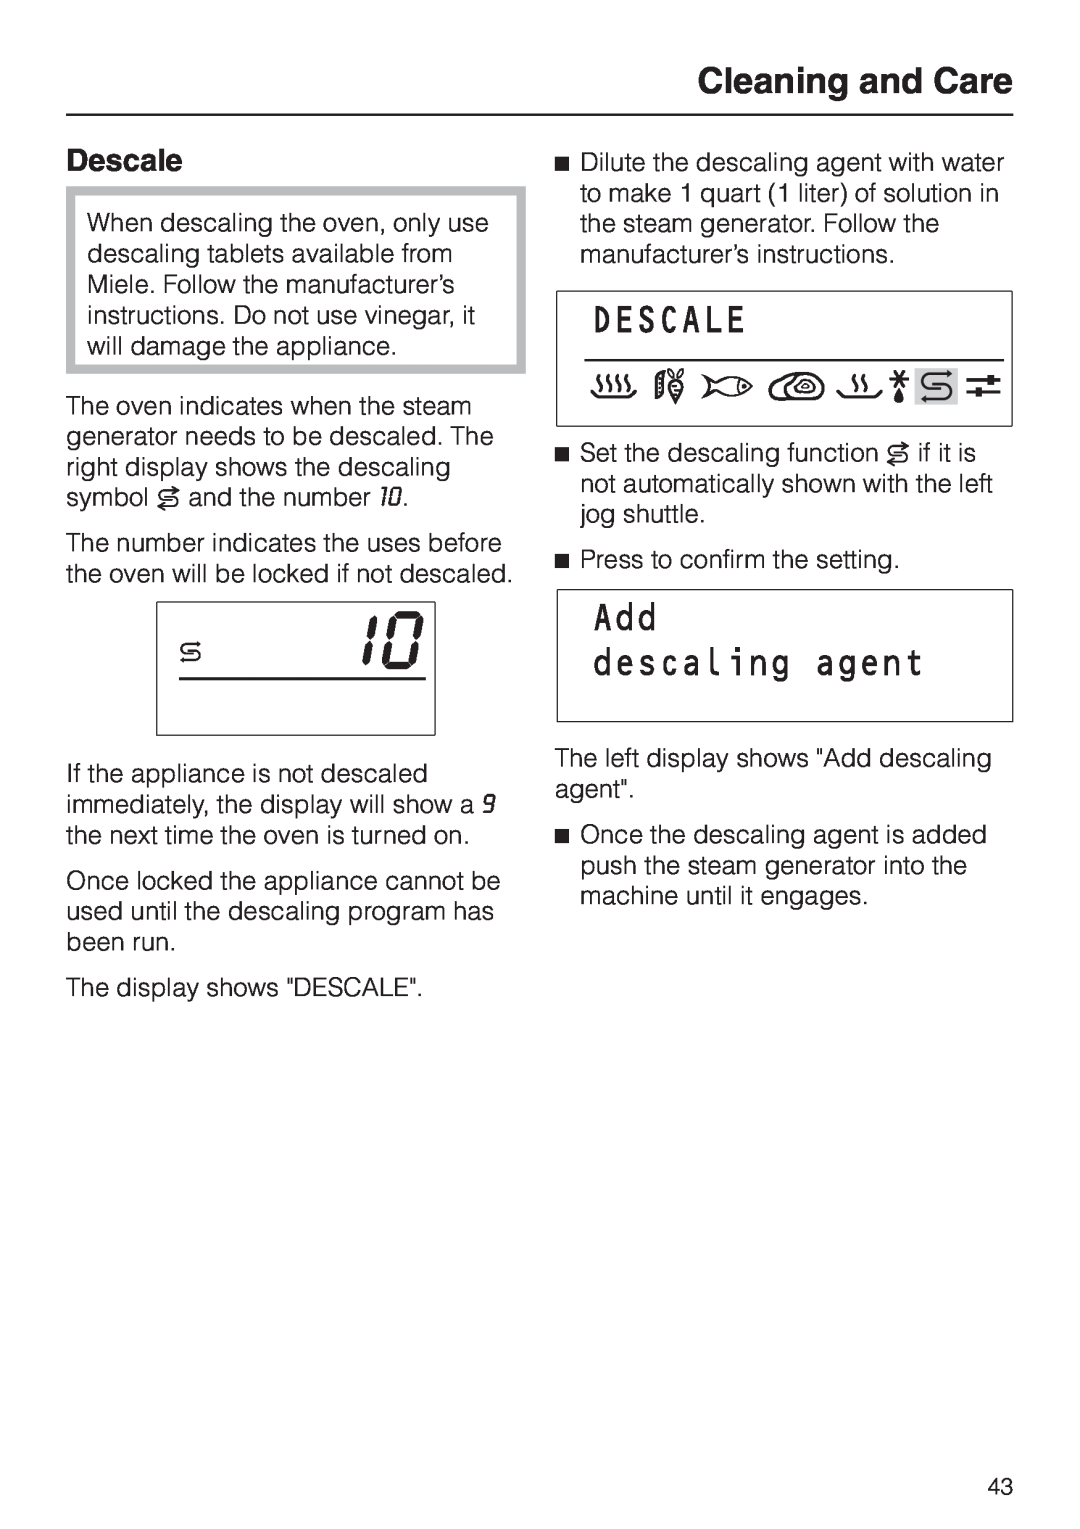 Miele DG 2661 installation instructions Descale, Cleaning and Care 